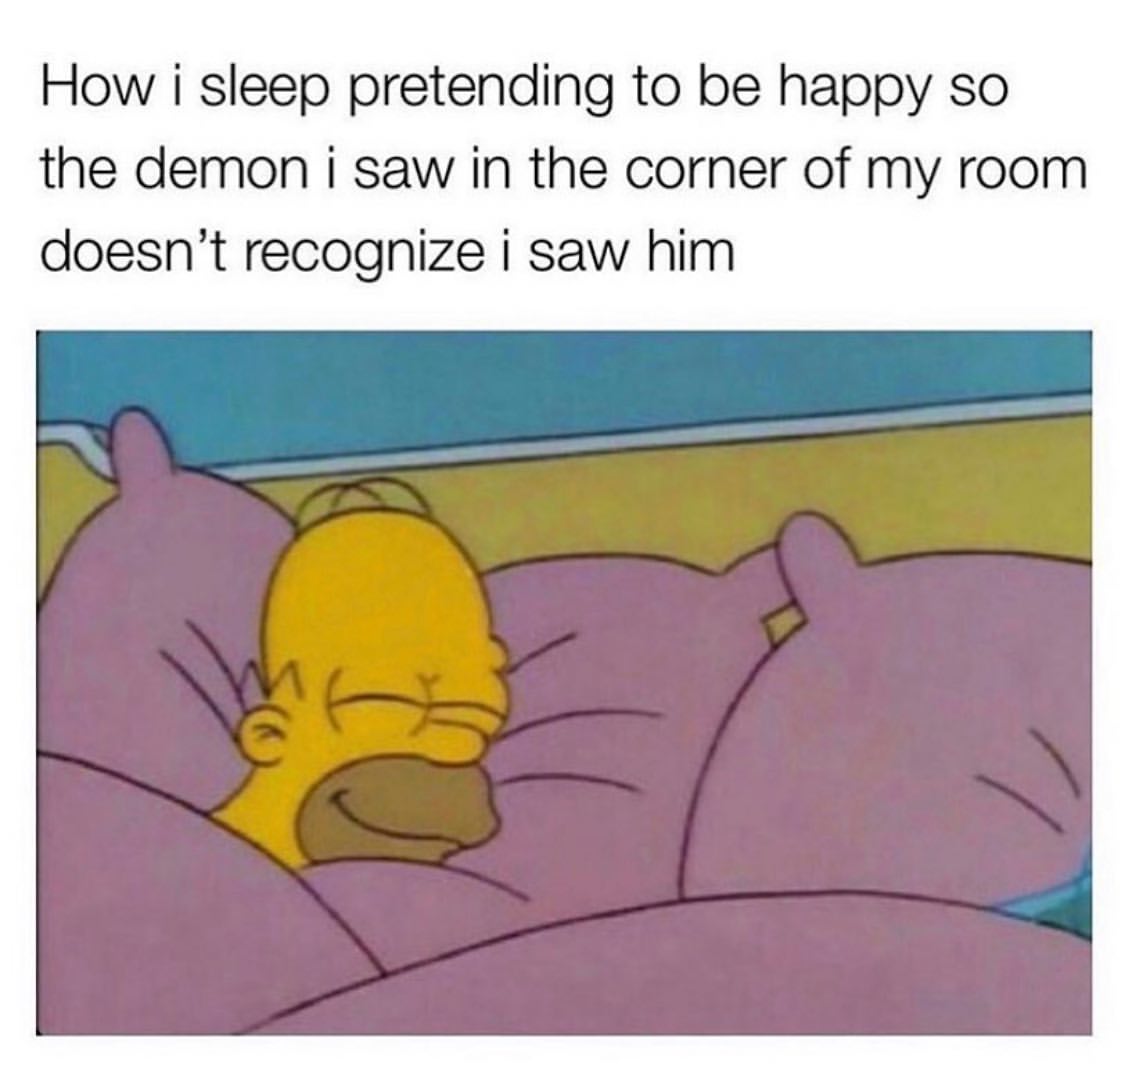 How I sleep pretending to be happy so the demon I saw in the corner of my room doesn't recognize I saw him.